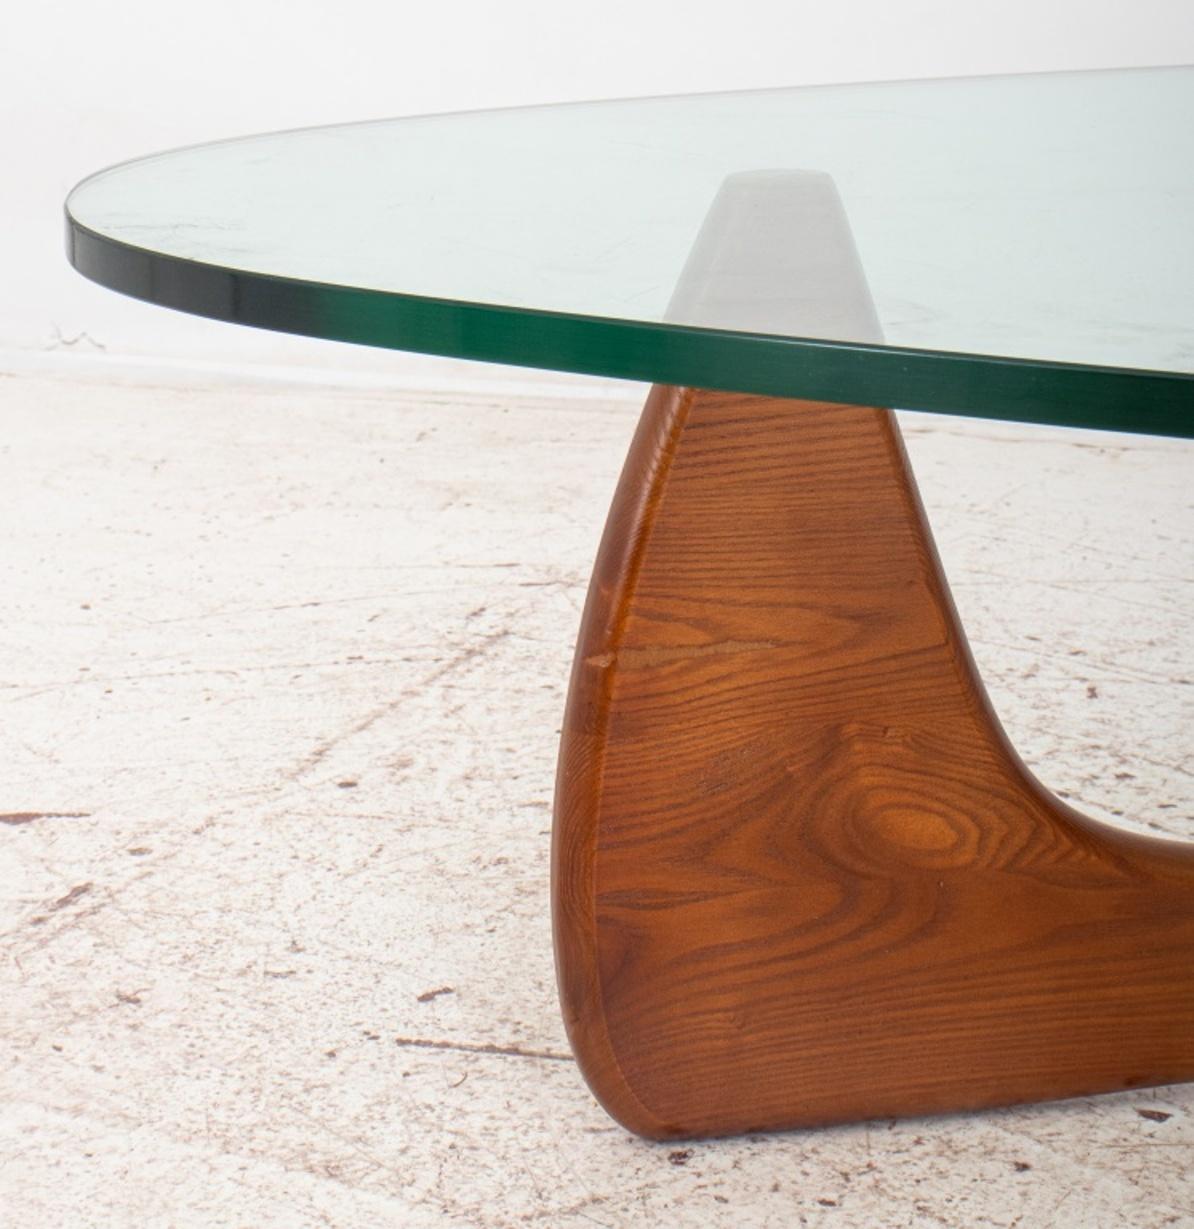 After Isamu Noguchi (American, 1904-1988) 1947 design for Herman Miller in walnut and smoked glass.

Dimensions: 15.75